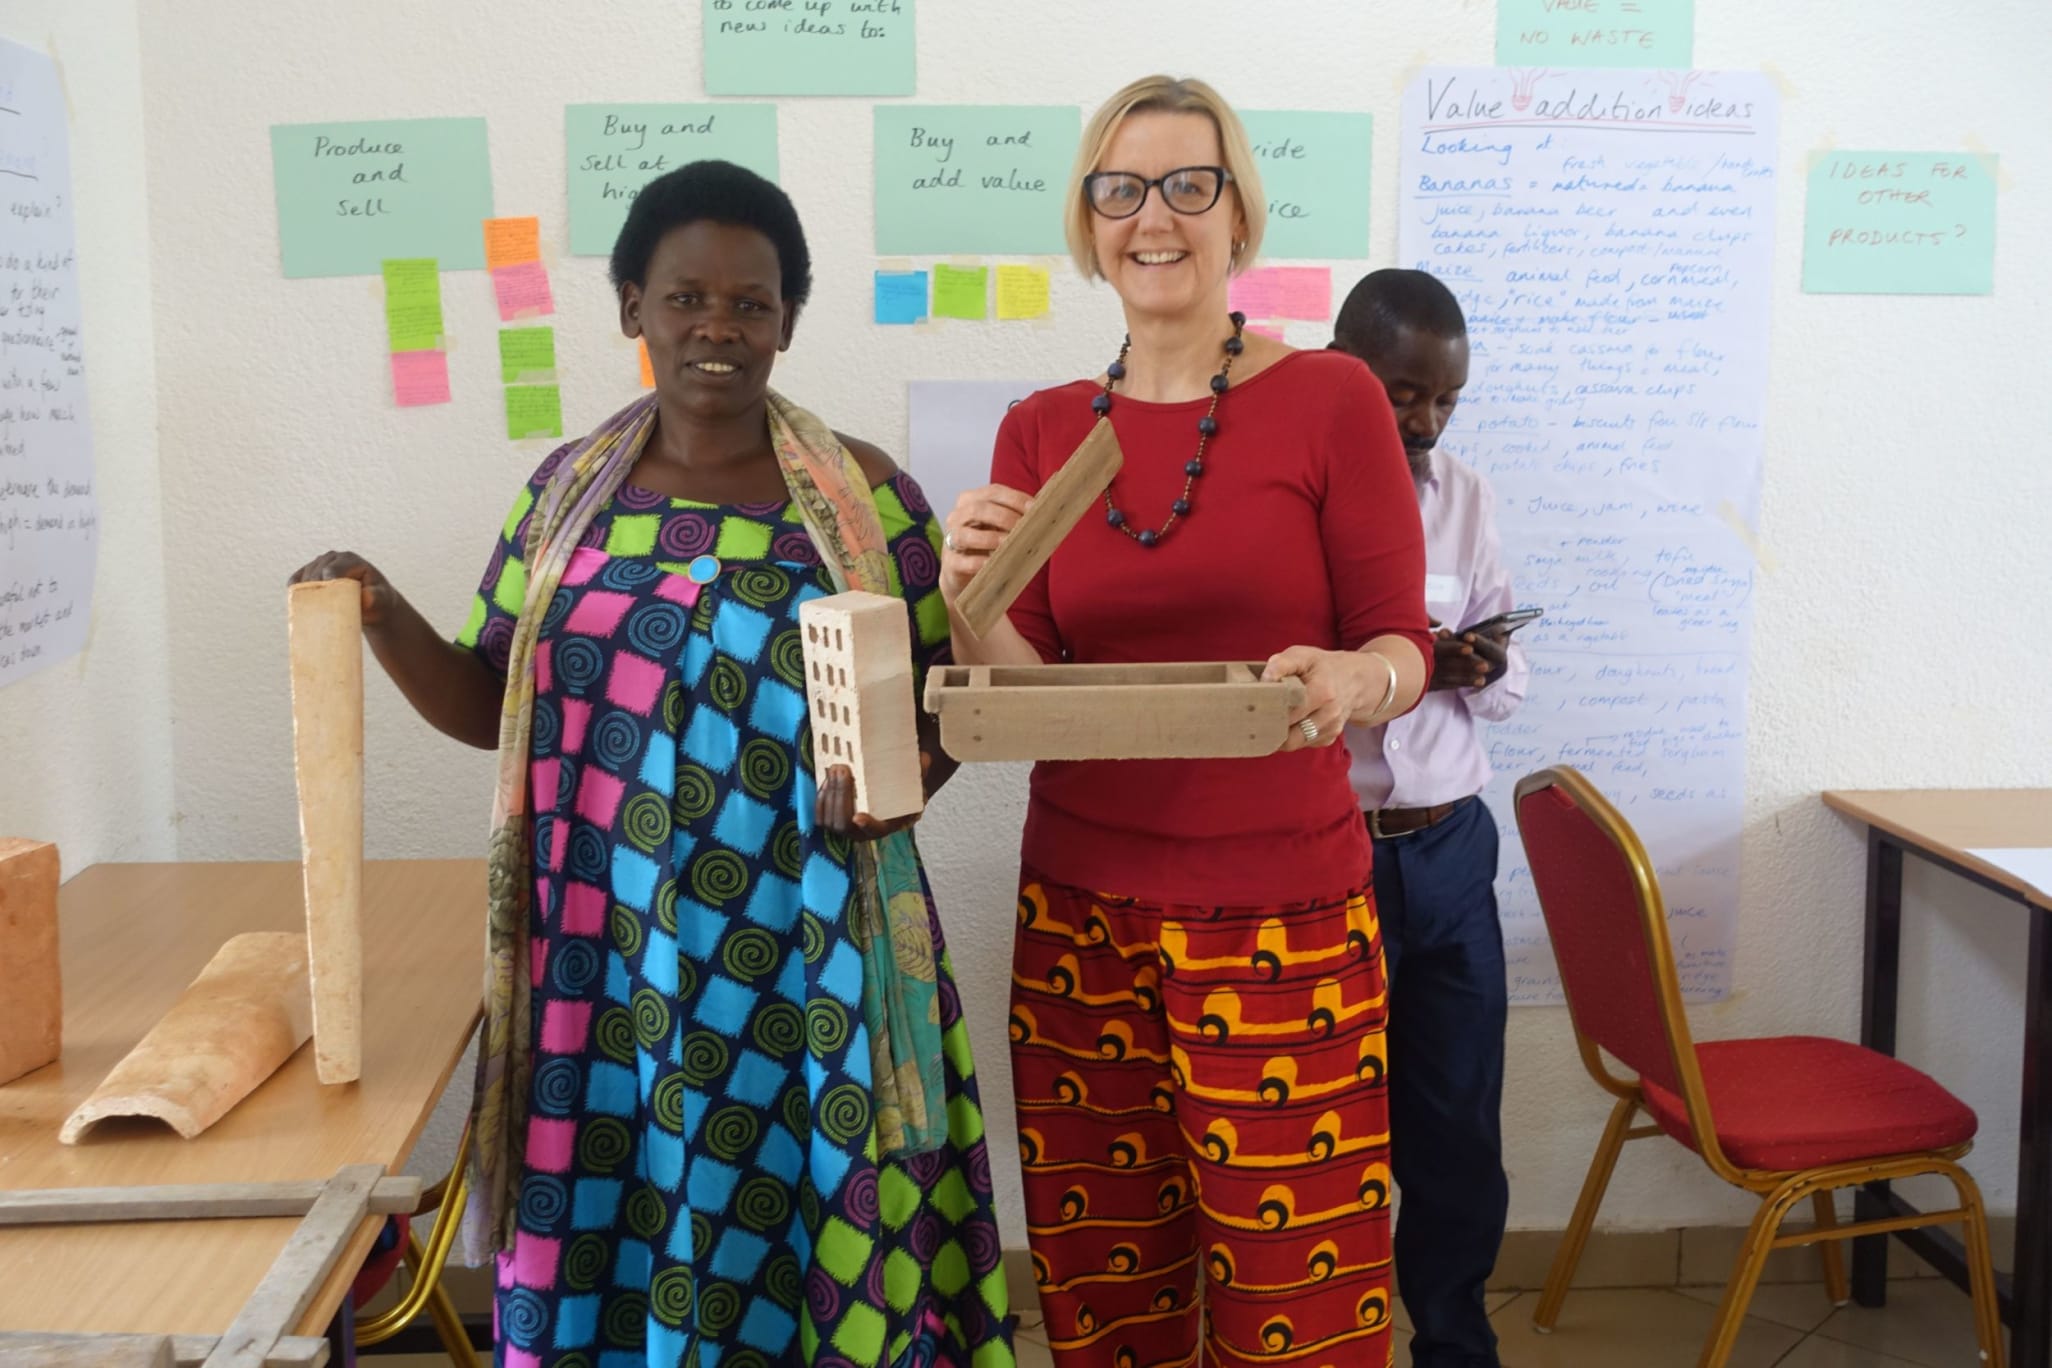 Our projects and Research Officer Amanda Benson with one of the training participants